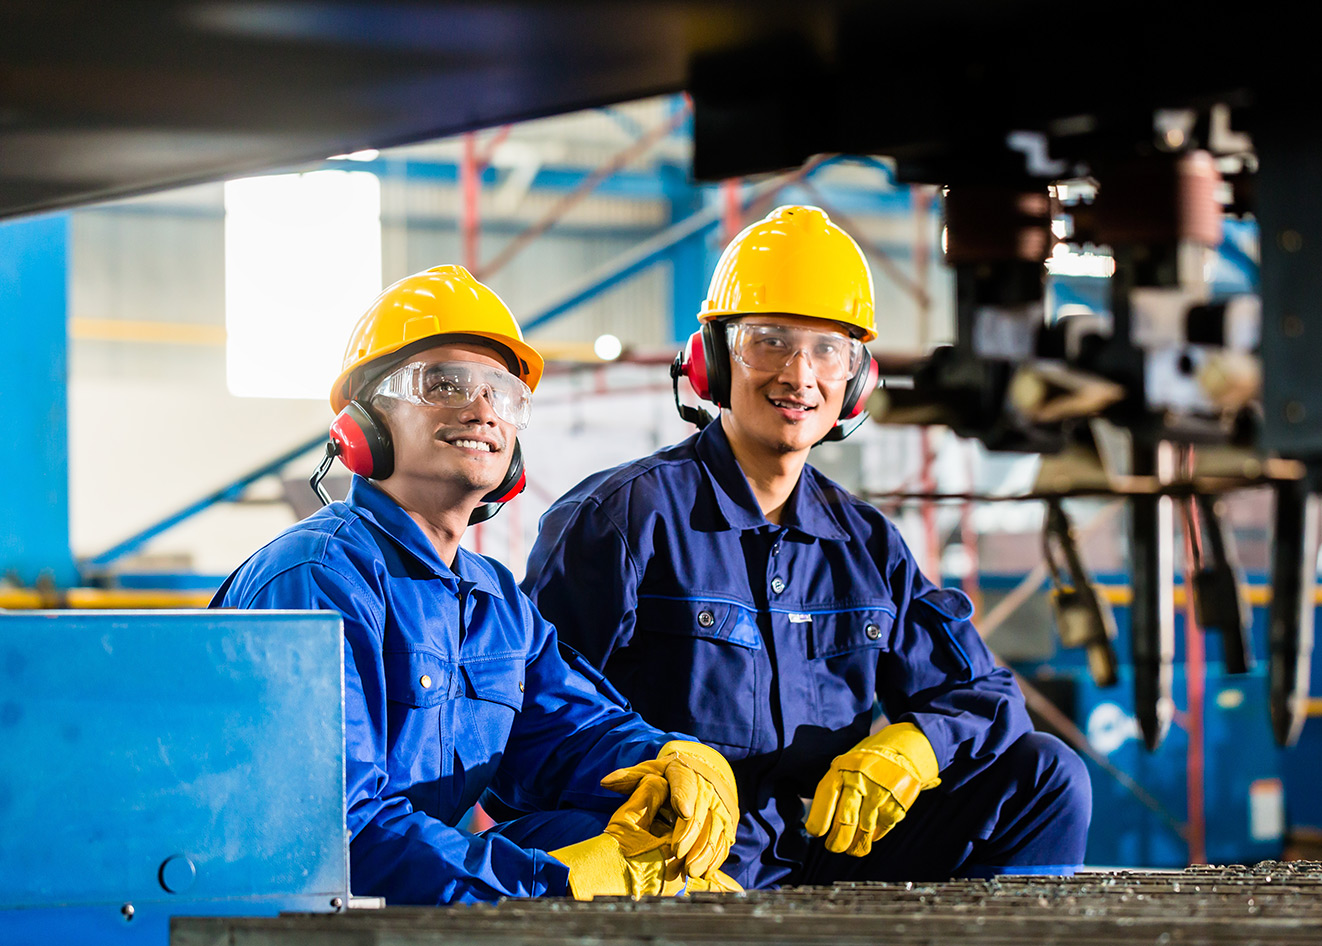 Manufacturing employees wearing safety gear at work